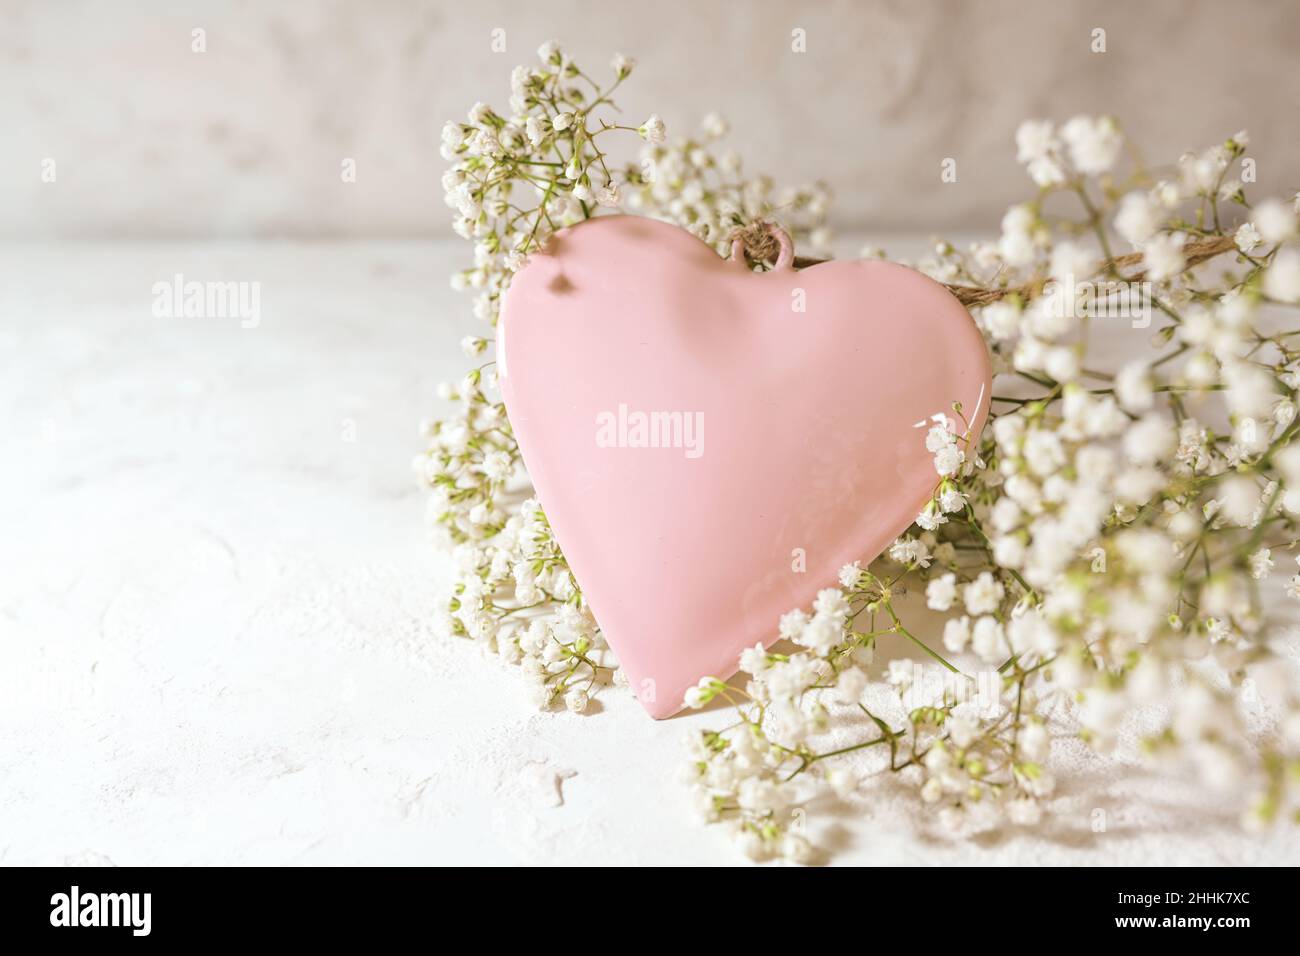 Rose colored heart shape and white gypsophila flowers on a light rustic background, love concept for valentines od mothers day, copy space, selected f Stock Photo